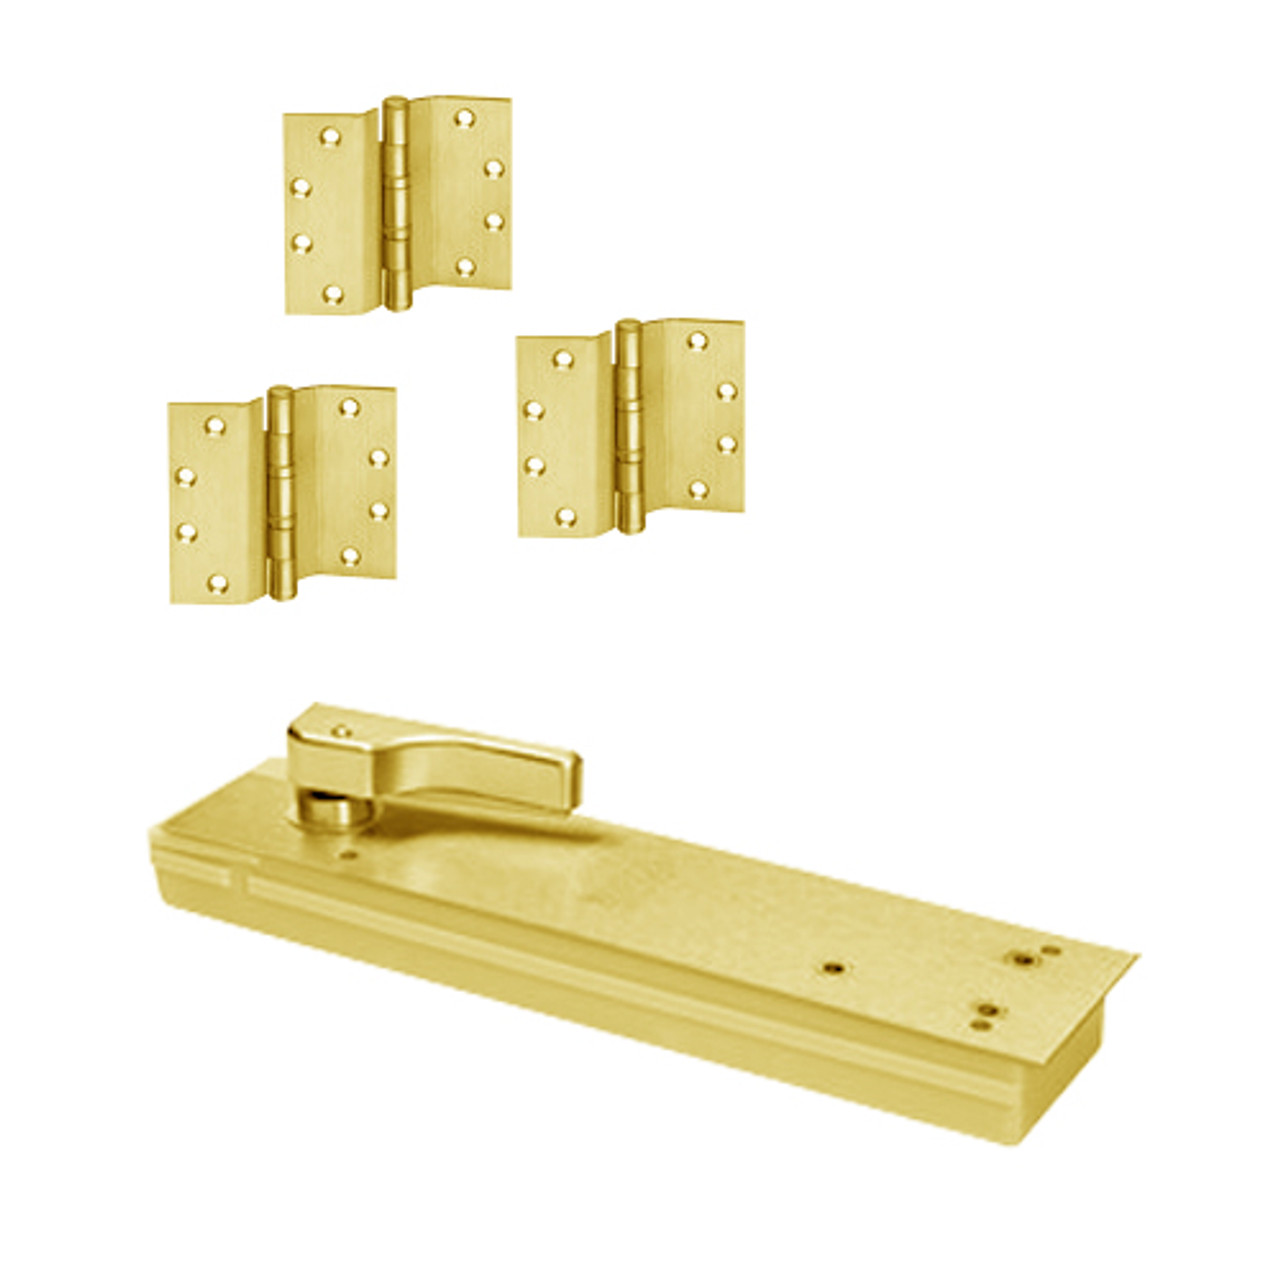 HM5105ABC90-RH-605 Rixson HM51 Series 3/4" Offset Hung Shallow Depth Floor Closers in Bright Brass Finish